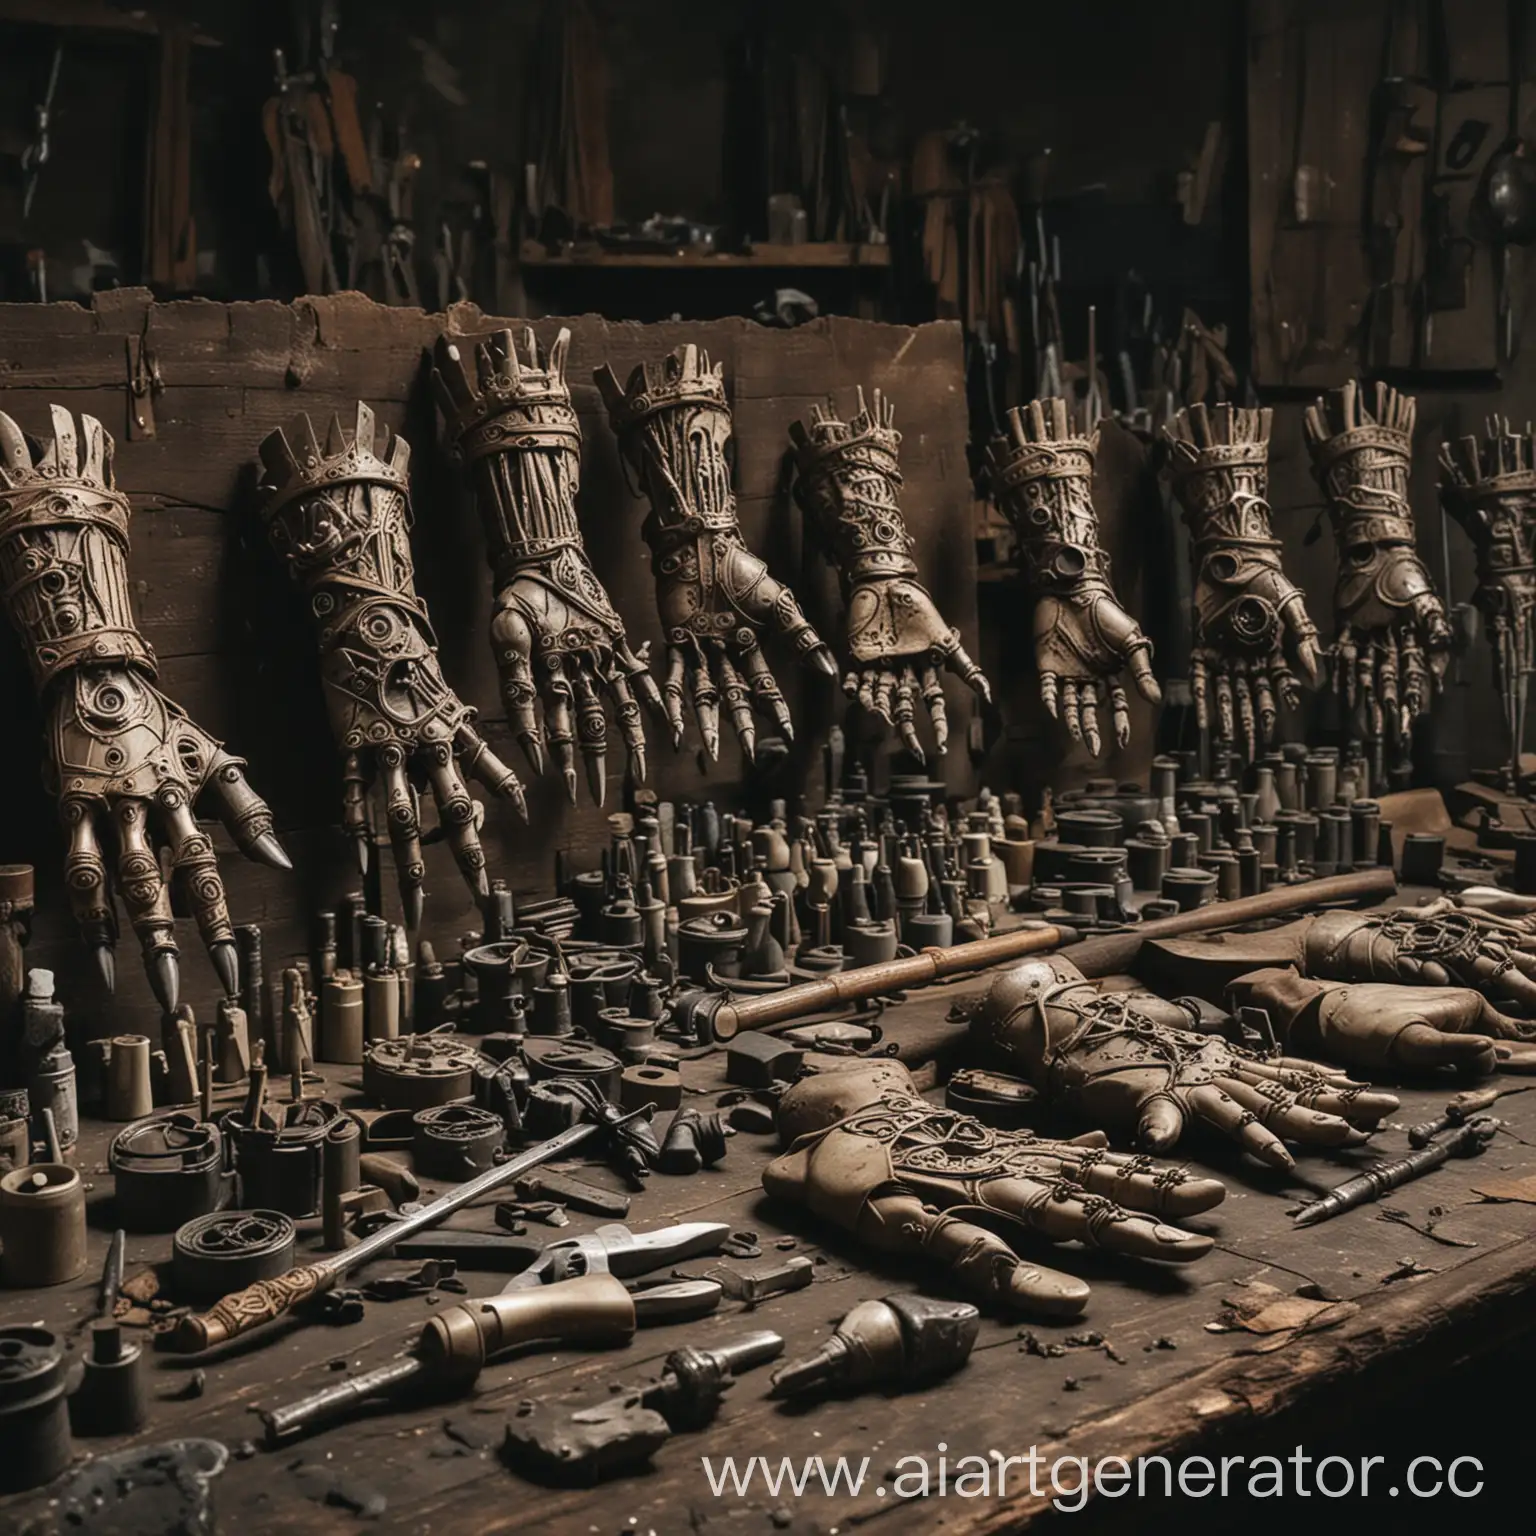 Dark-Fantasy-Workshop-of-Hand-Prostheses-in-the-Middle-Ages